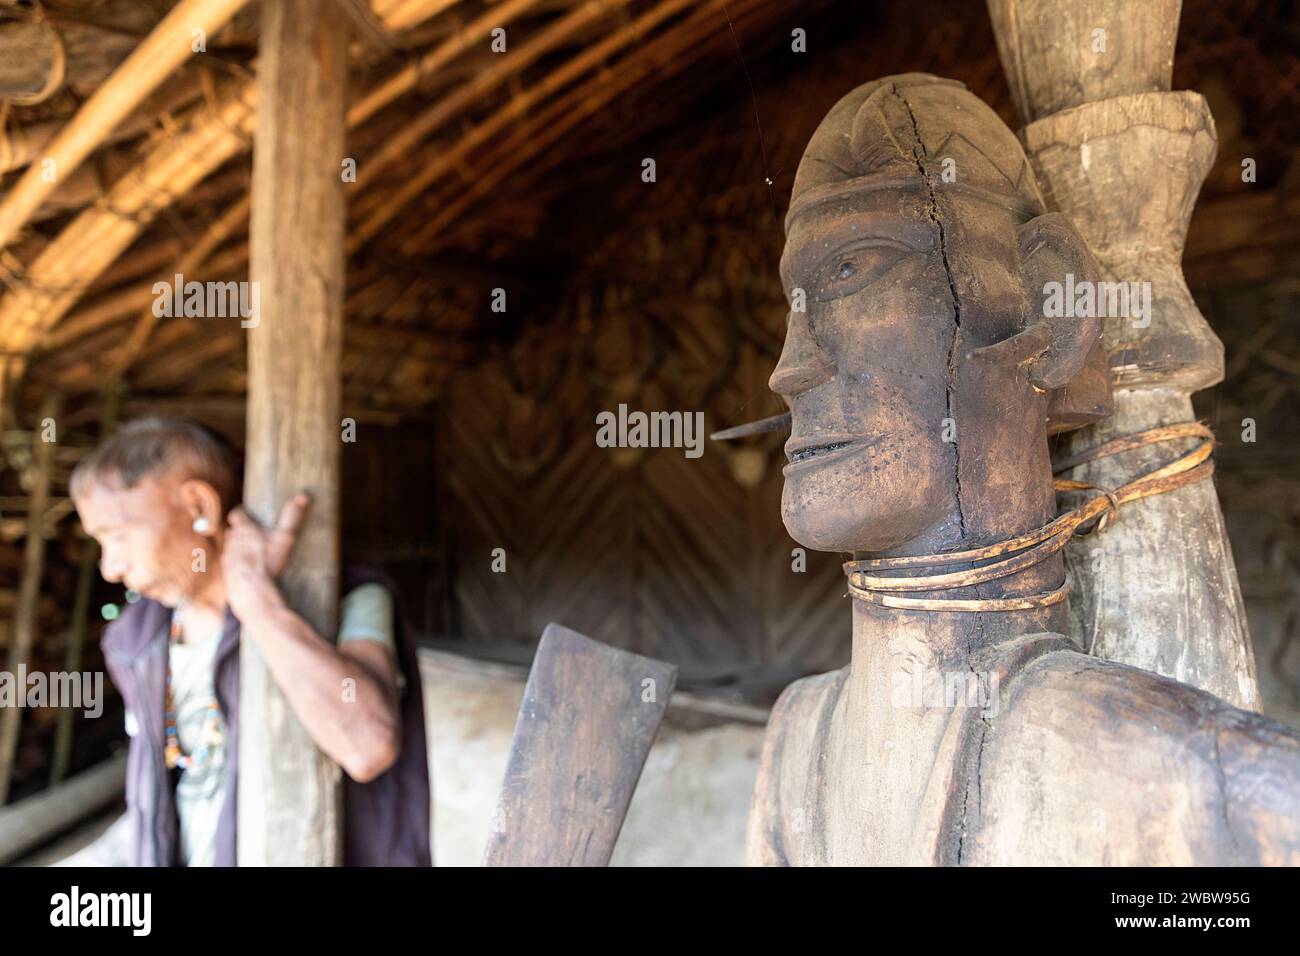 Traditional wood carved statute made by konyak tribe members at the entrance to the konyak traditional long house in longwa village, nagaland, india Stock Photo